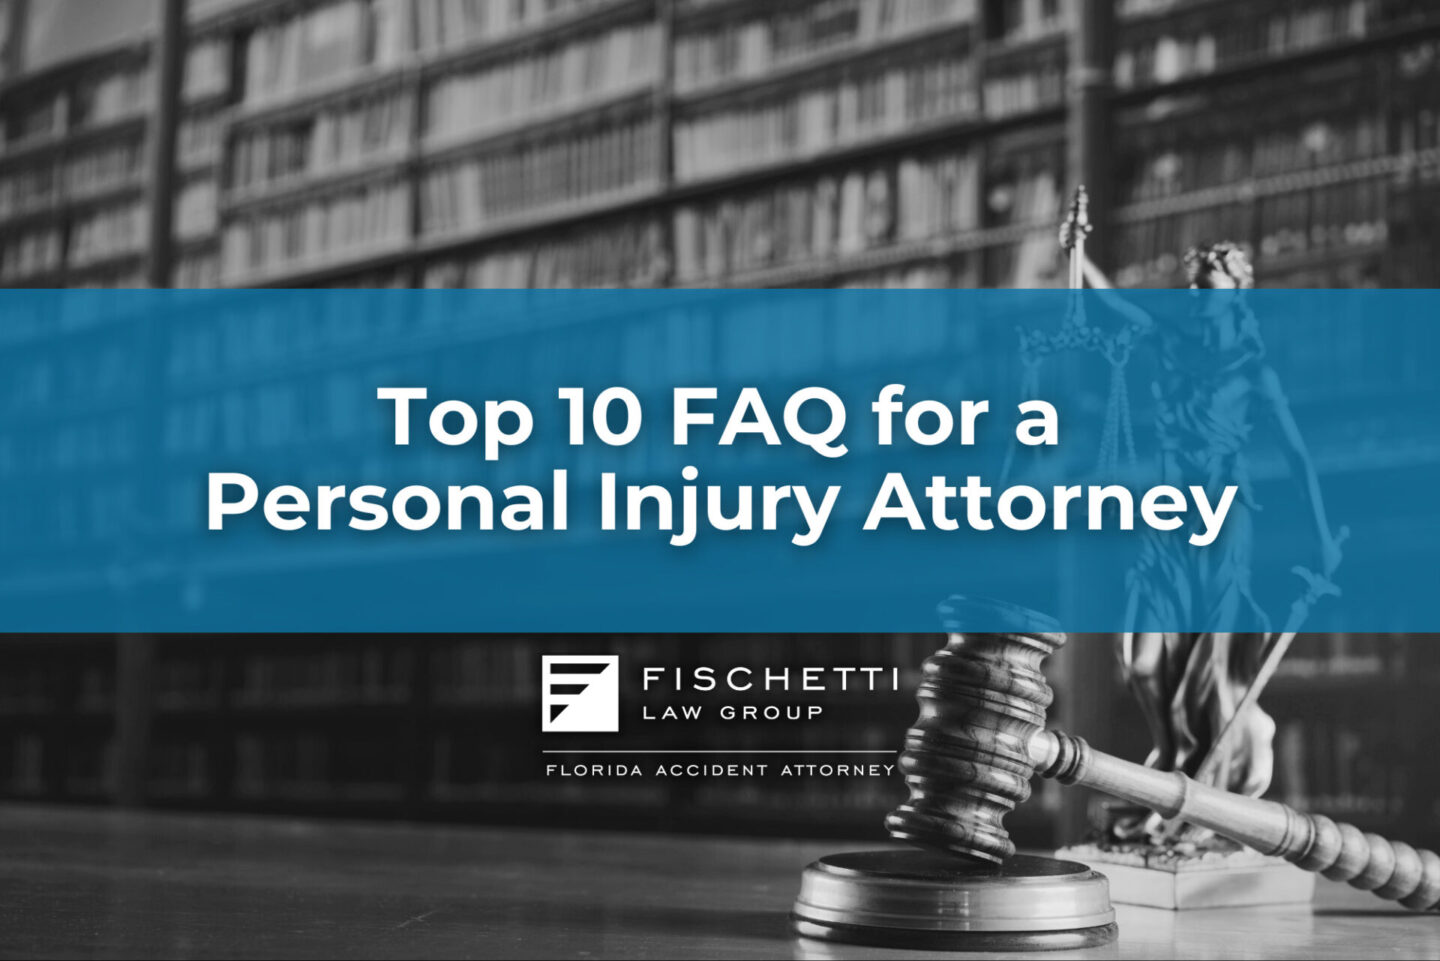 banner saying top 10 faq for a personal injury attorney